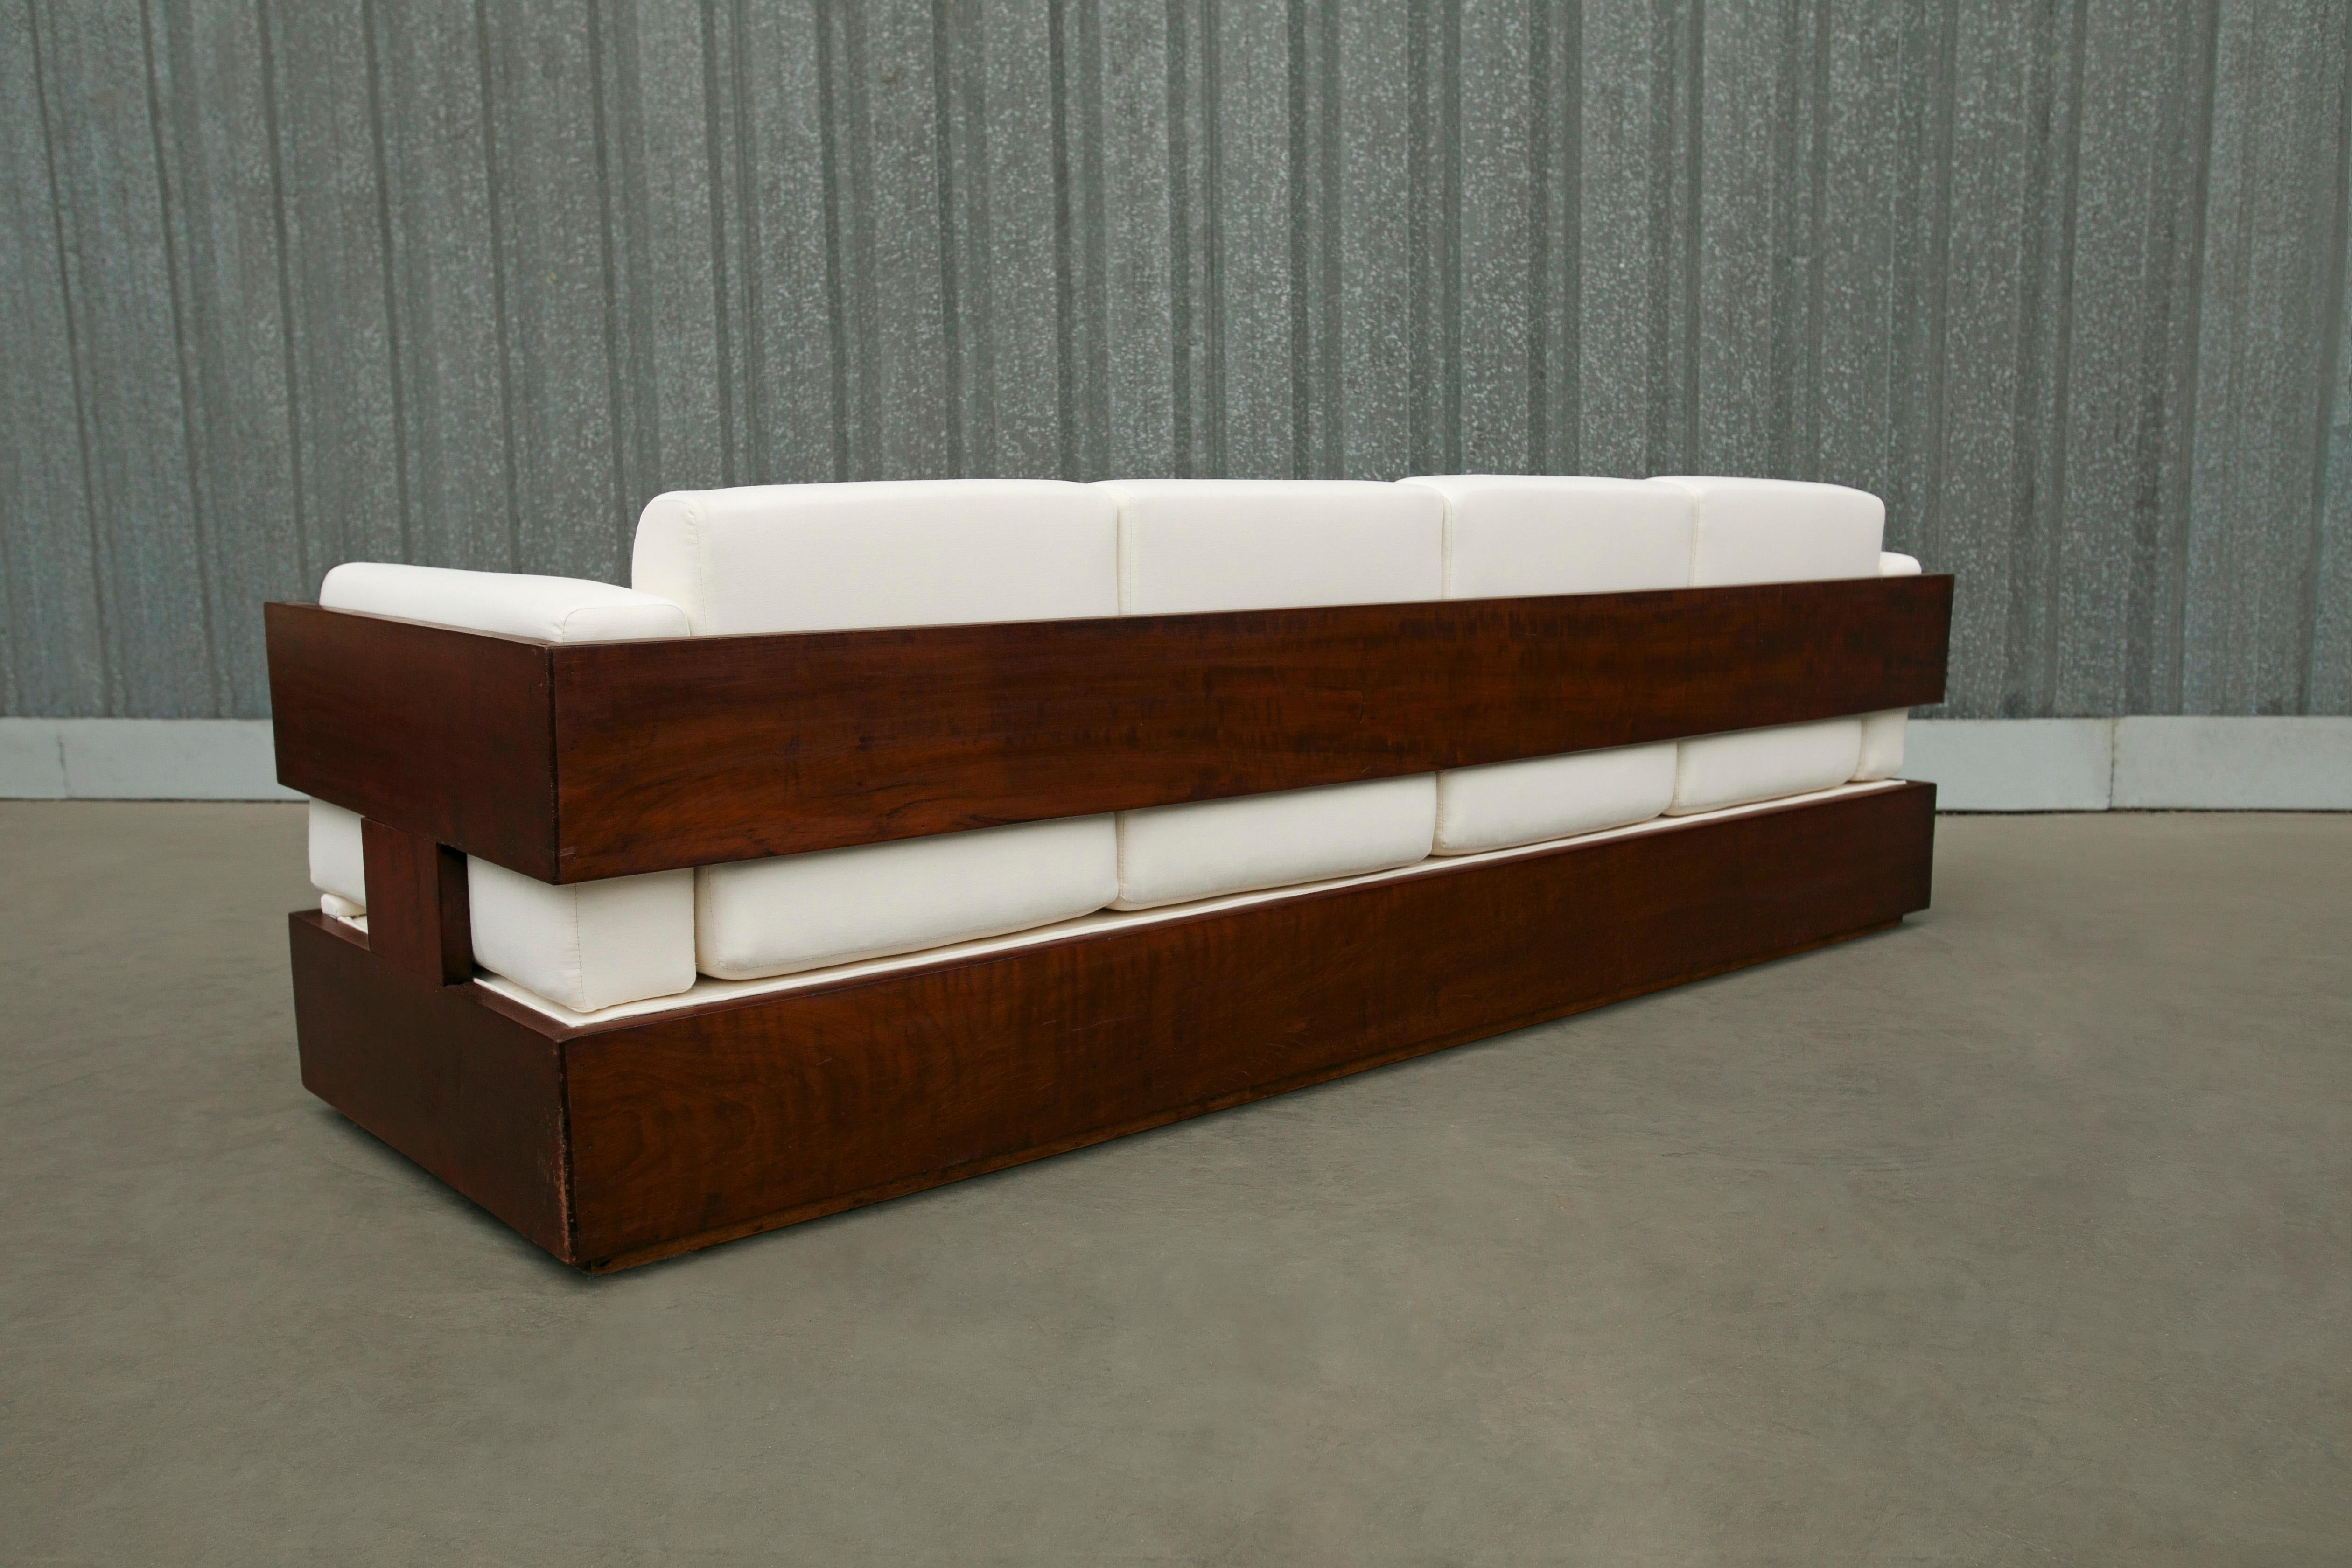 Hand-Carved Brazilian Modern Sofa in Hardwood and White Linen by Celina, Brazil, c. 1960 For Sale